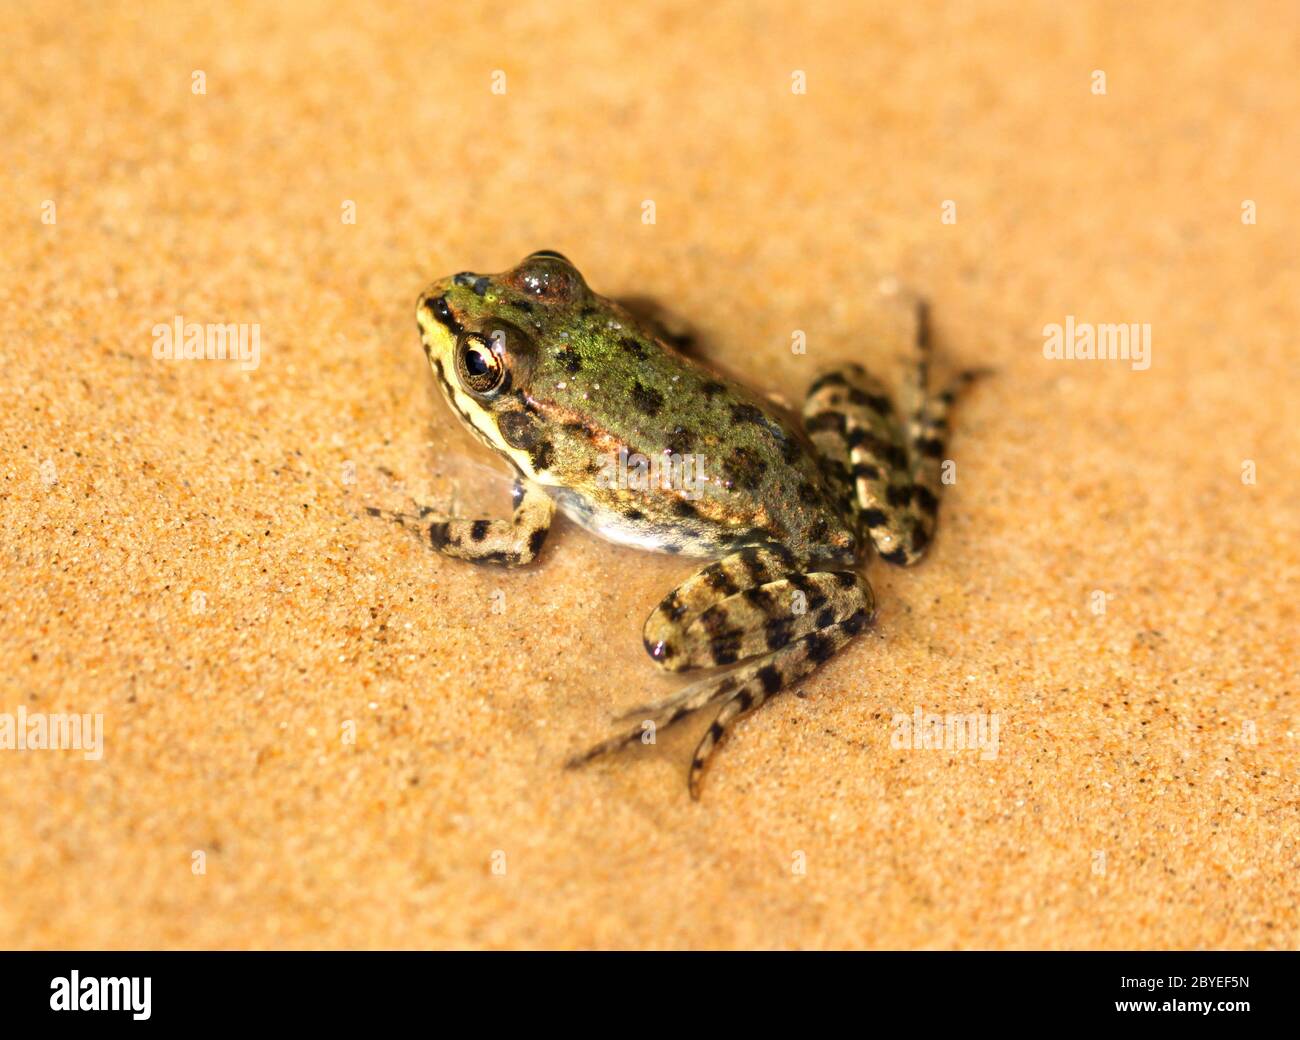 big green frog sit on wet sand Stock Photo